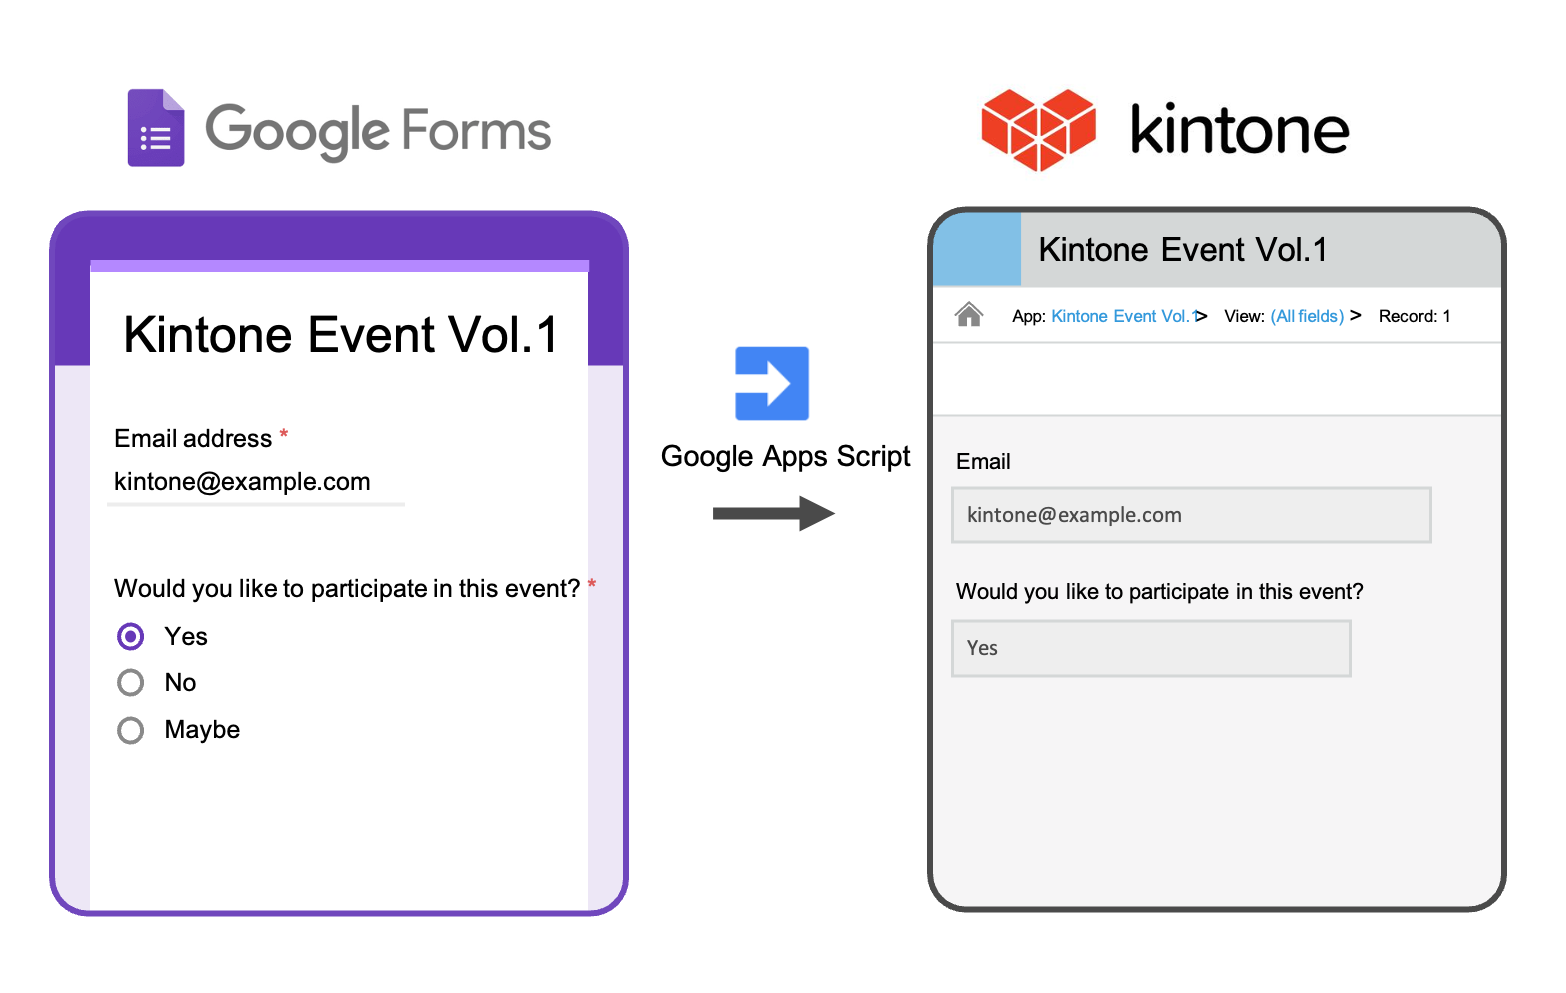 Send Google Forms Submissions to Kintone